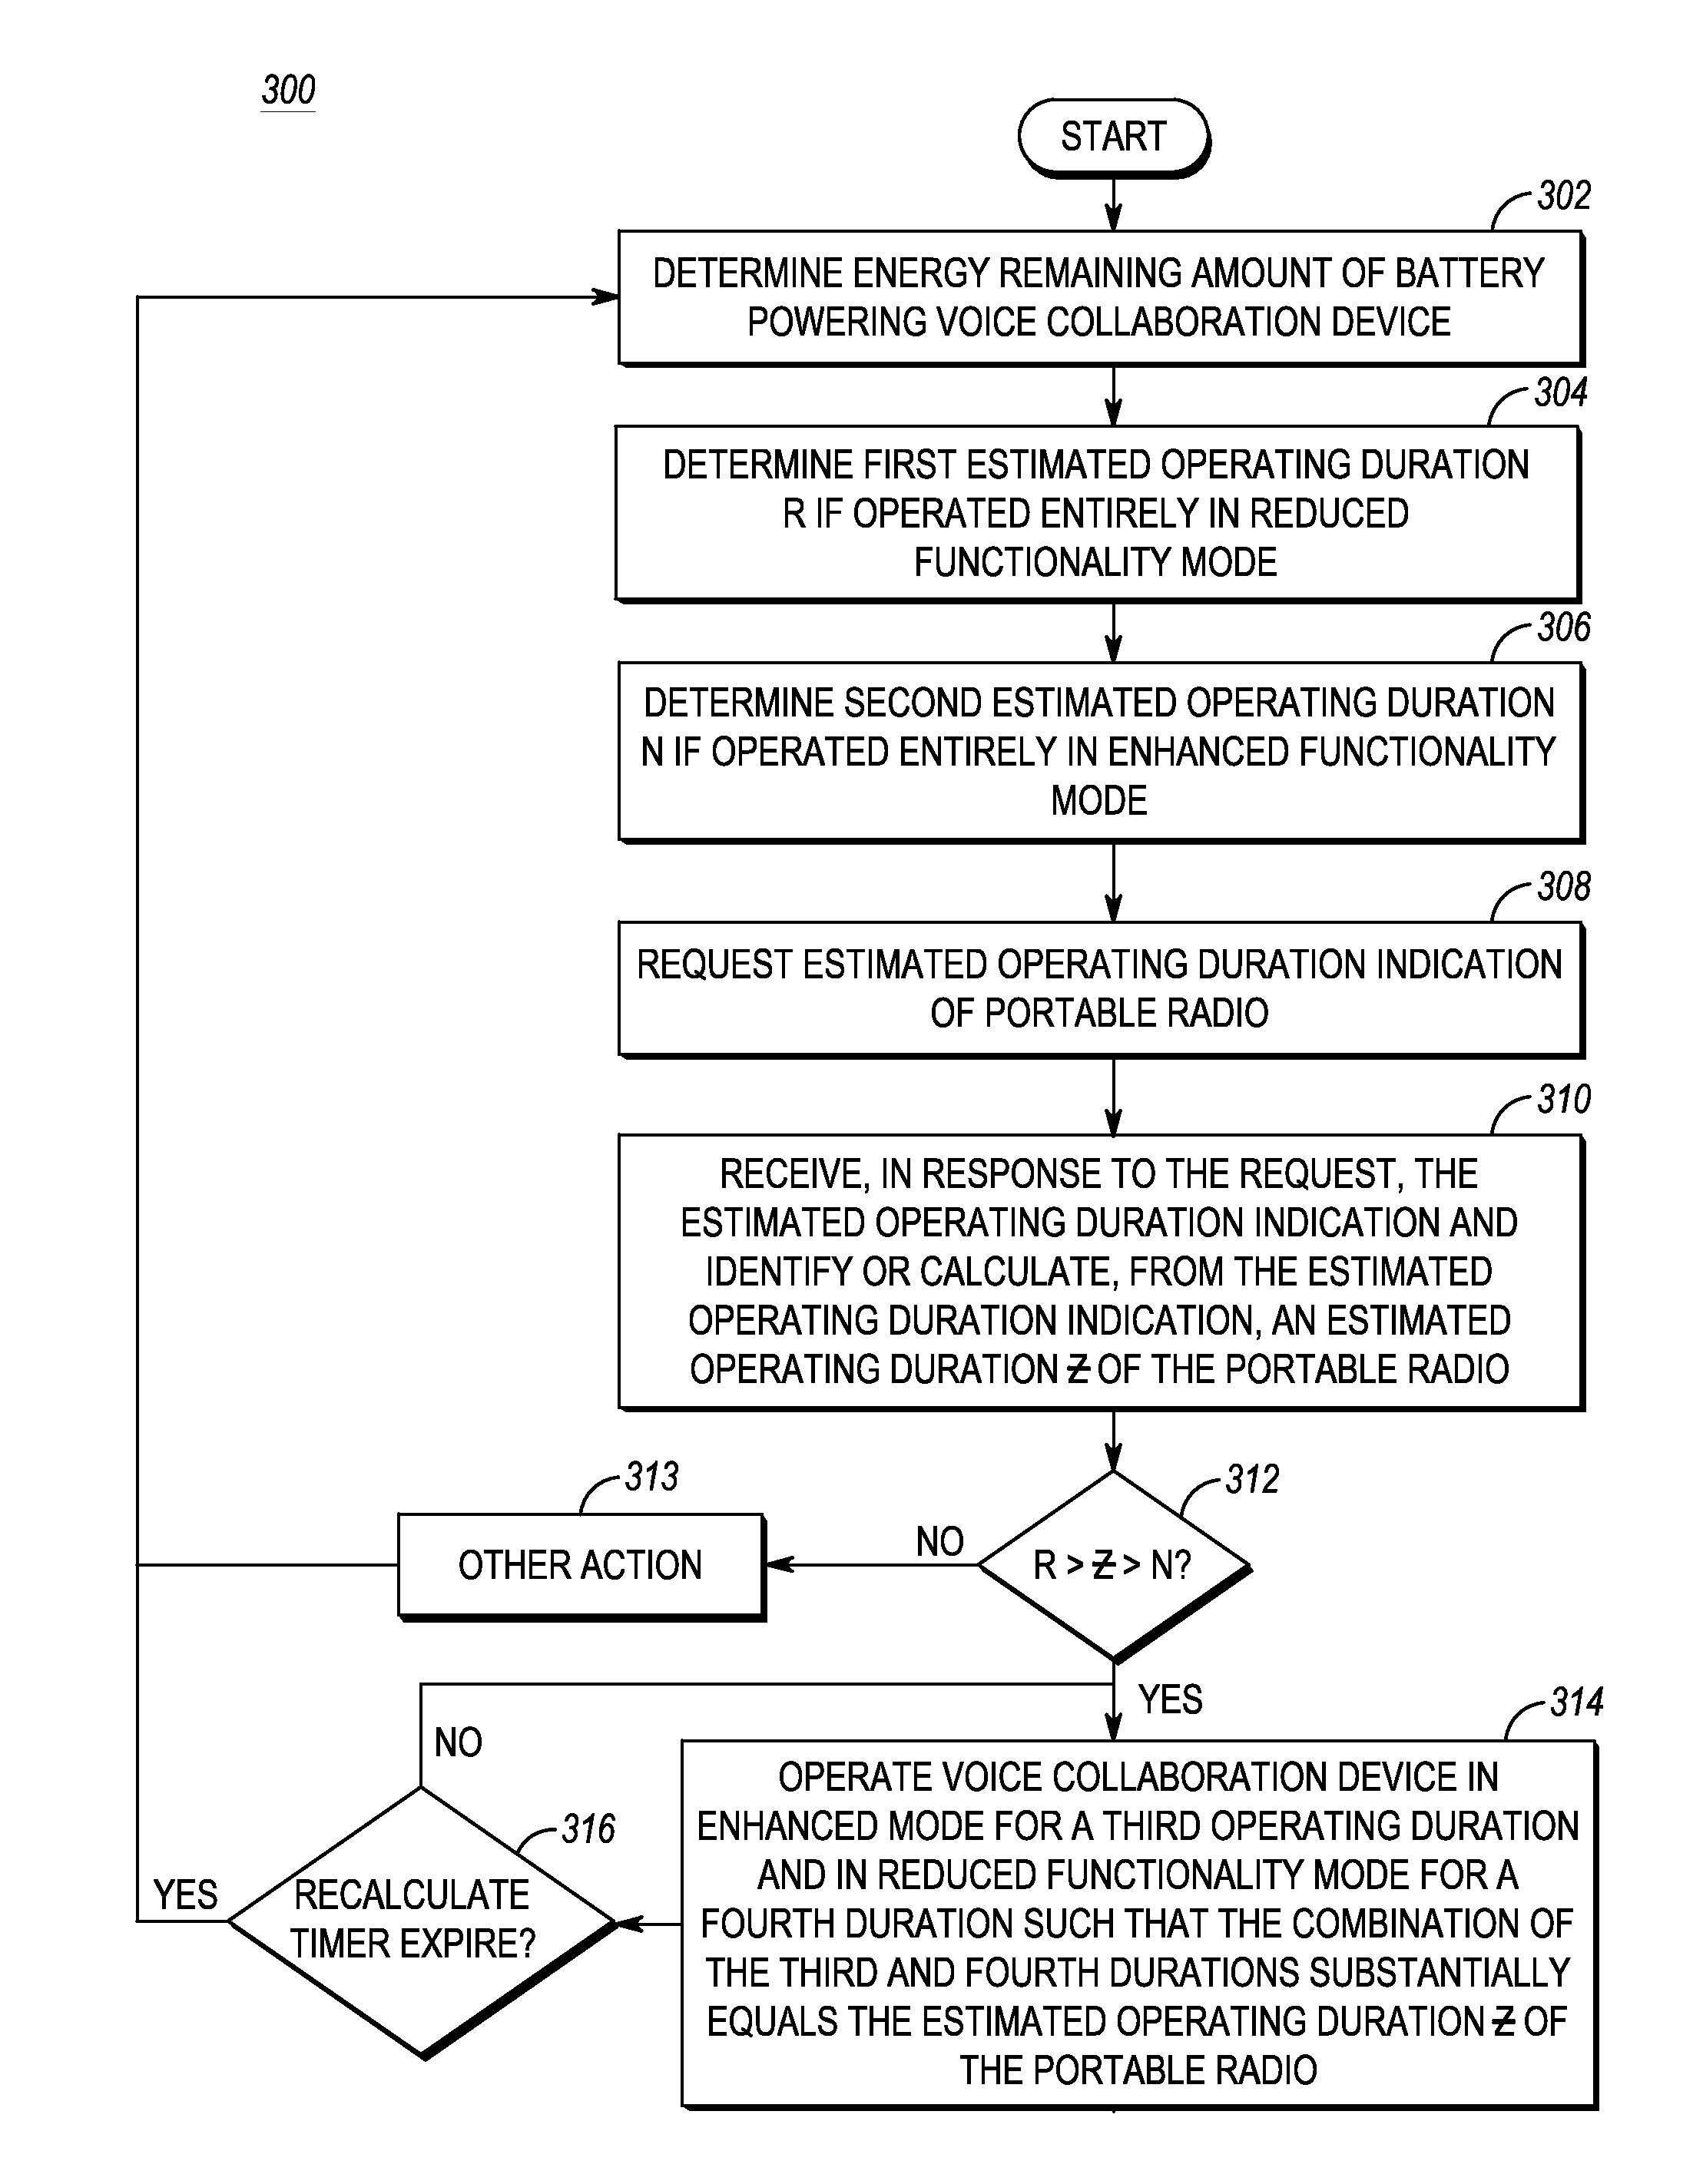 Method, device, and system for operating a multi-function voice-collaboration device to manage battery life